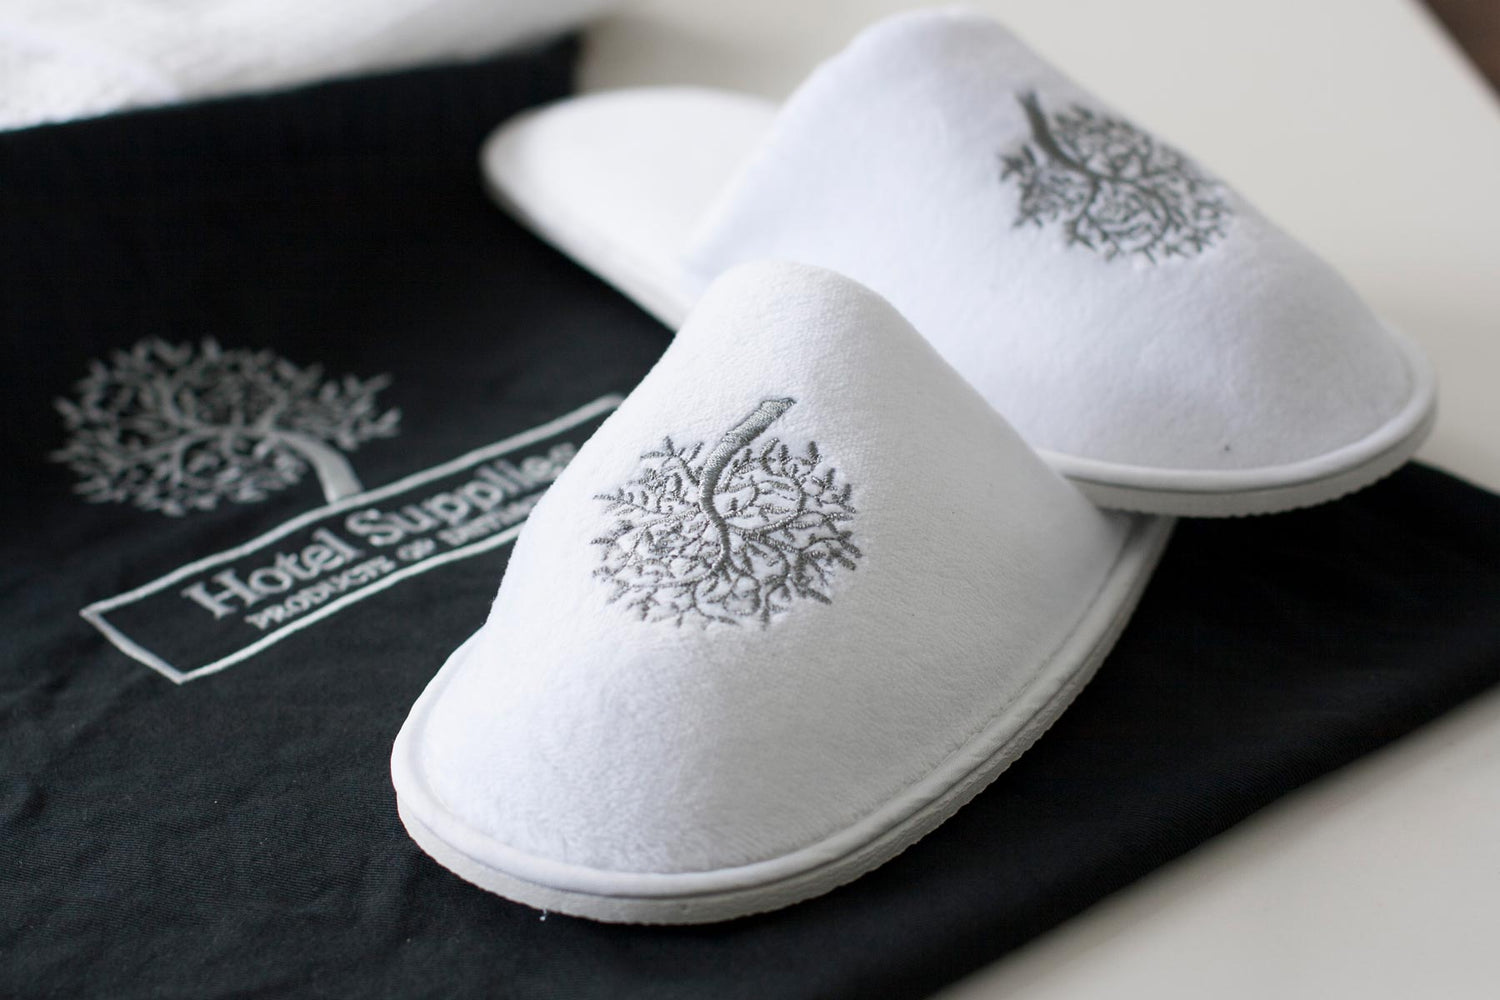 Hotel supplies bespoke products including slippers and bags